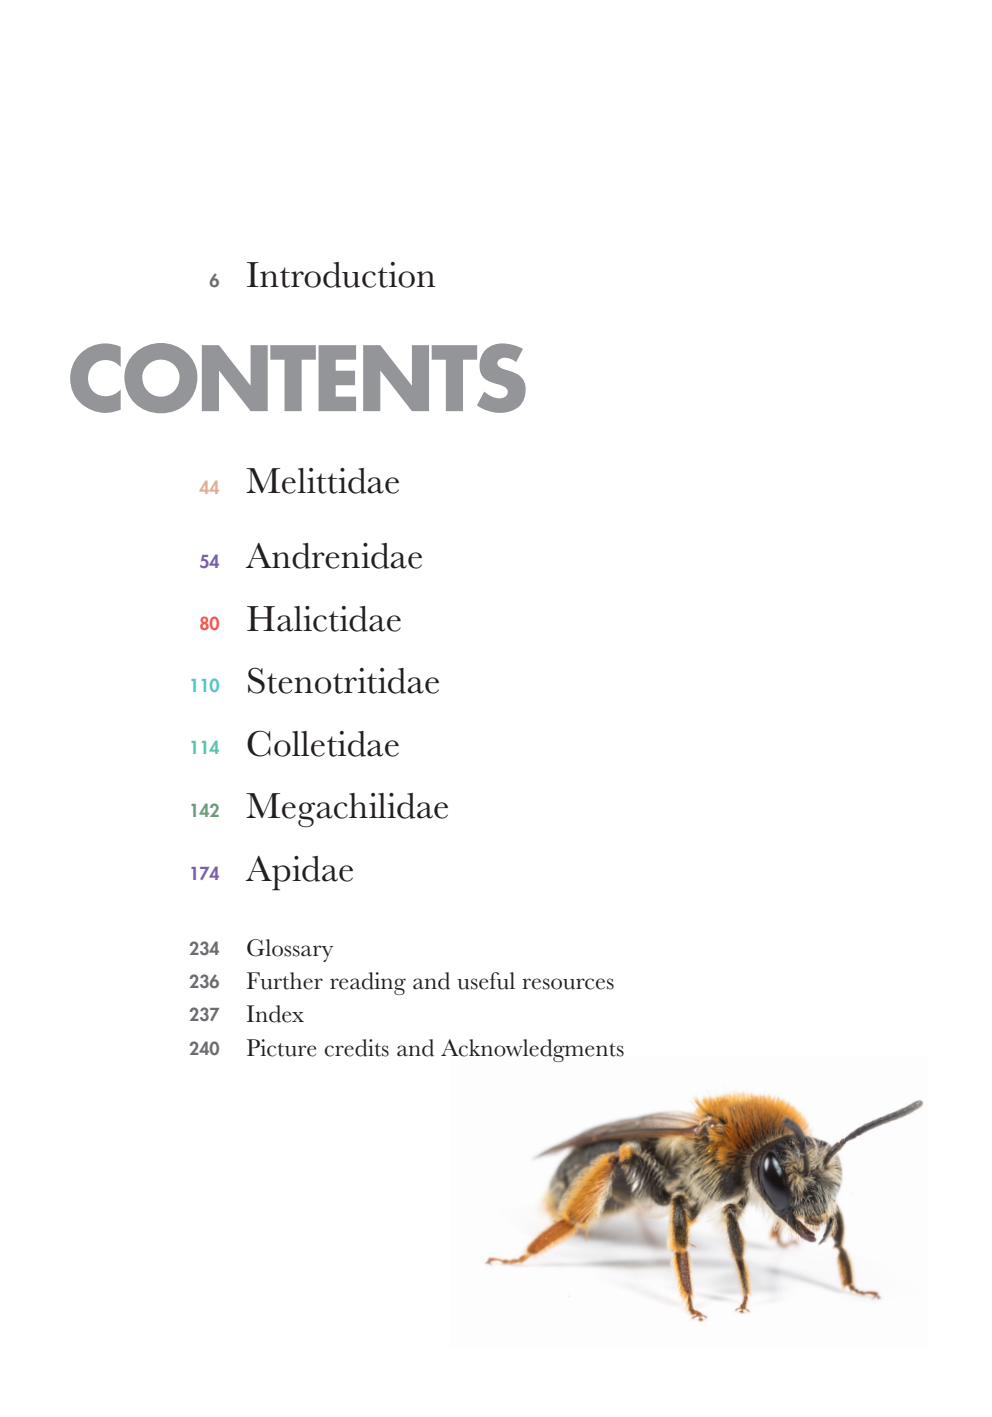 Bees%20of%20the%20World_006.png